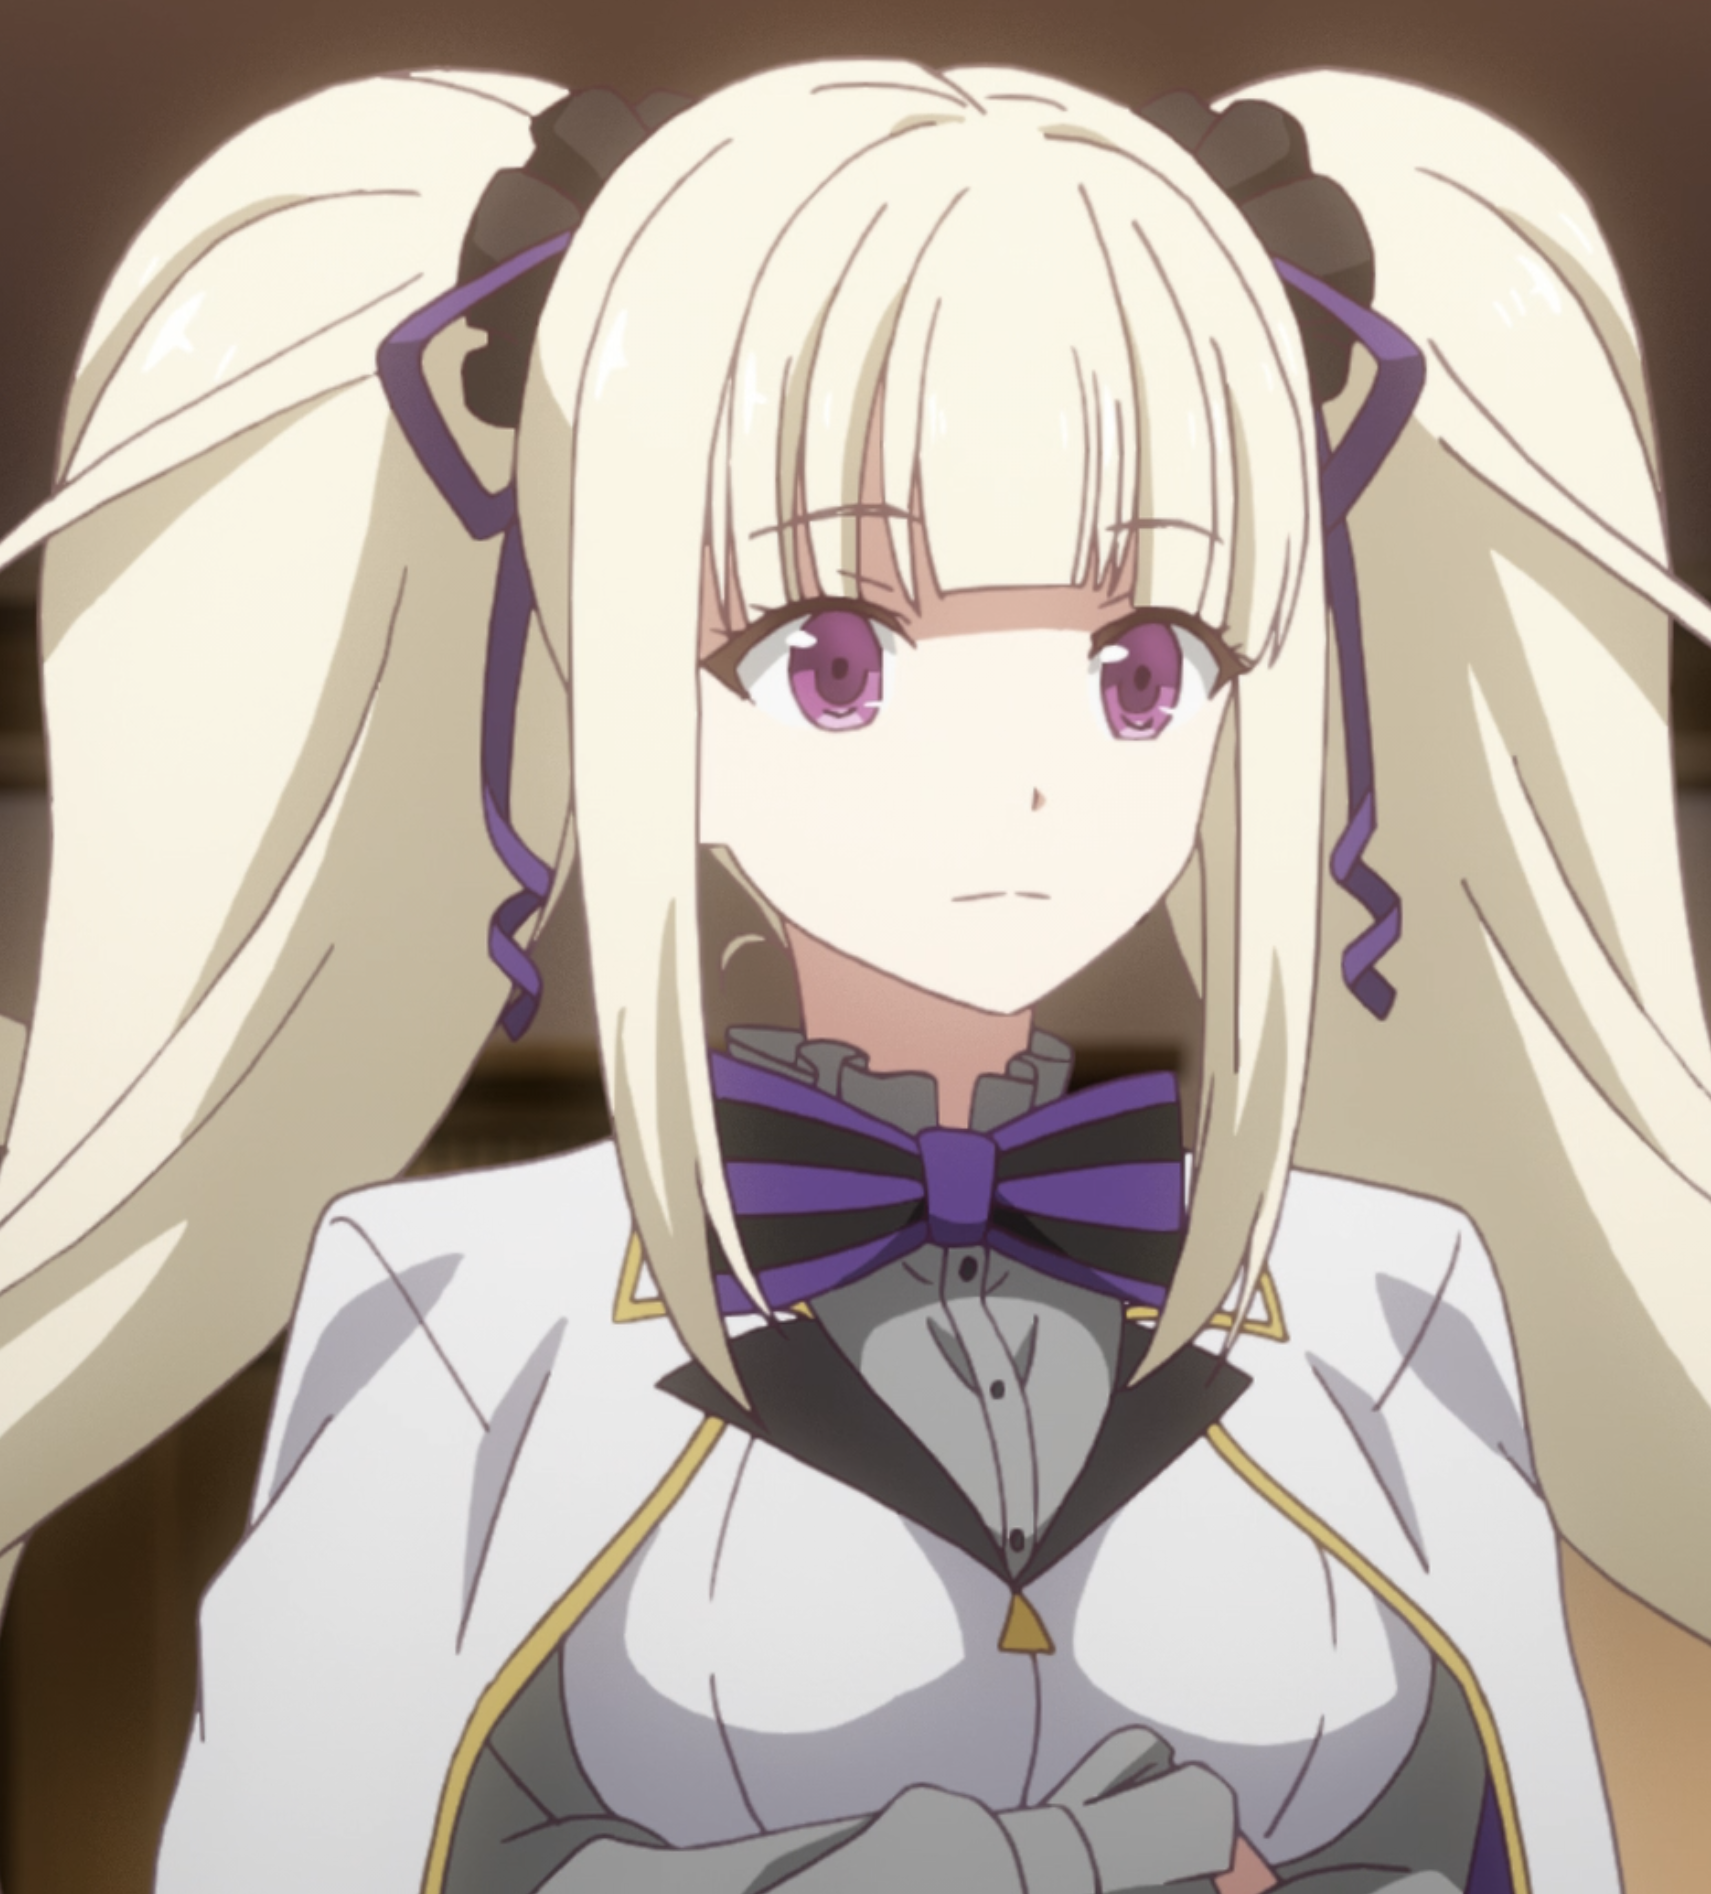 The Greatest Demon Lord is Reborn as a Typical Nobody - Episode 1